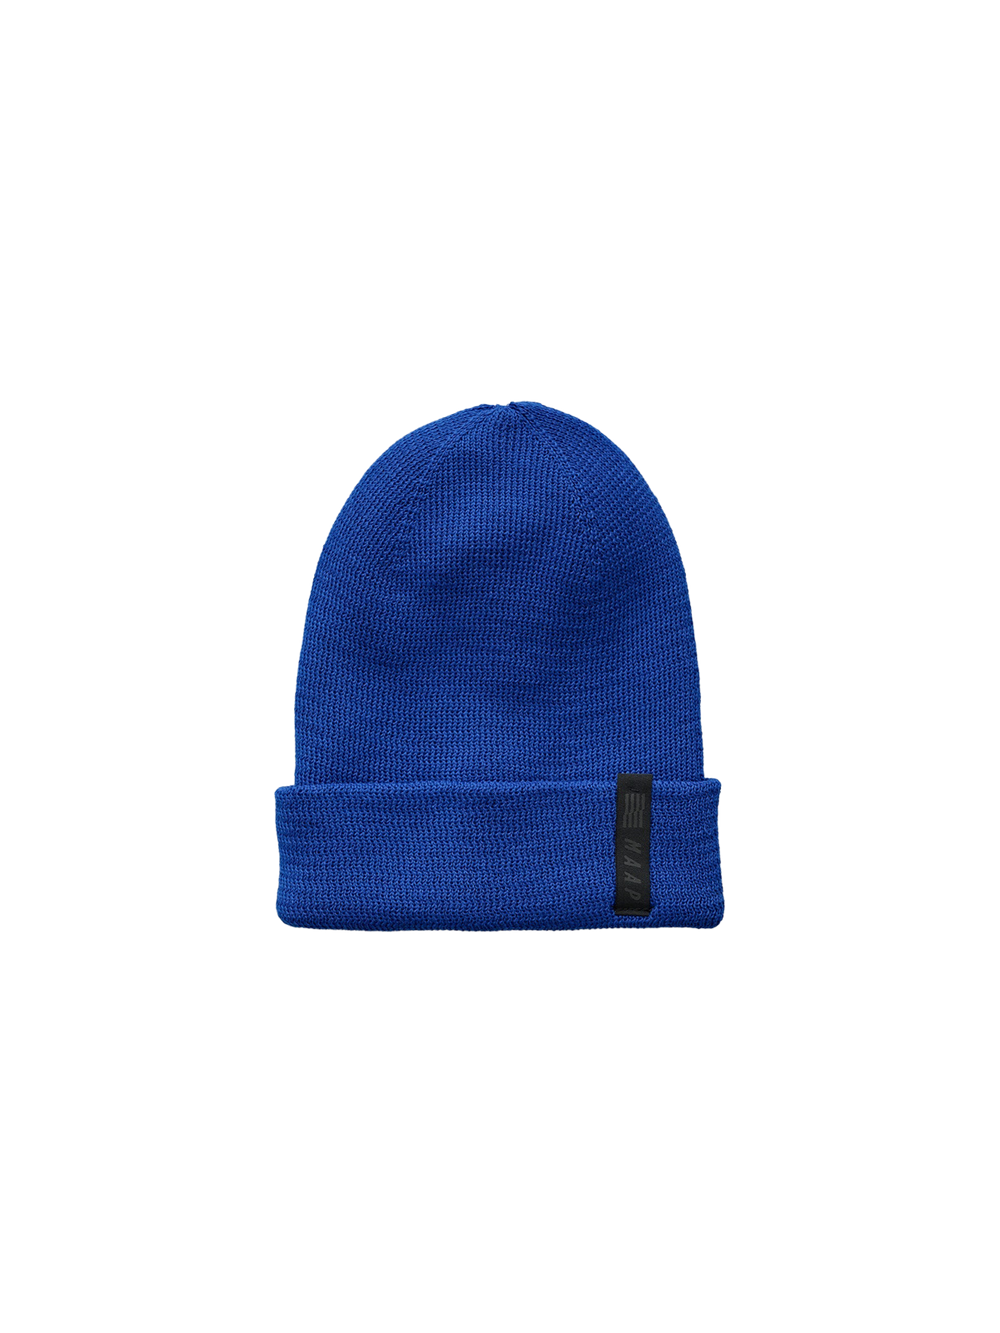 Product Image for Repreve Rib Beanie